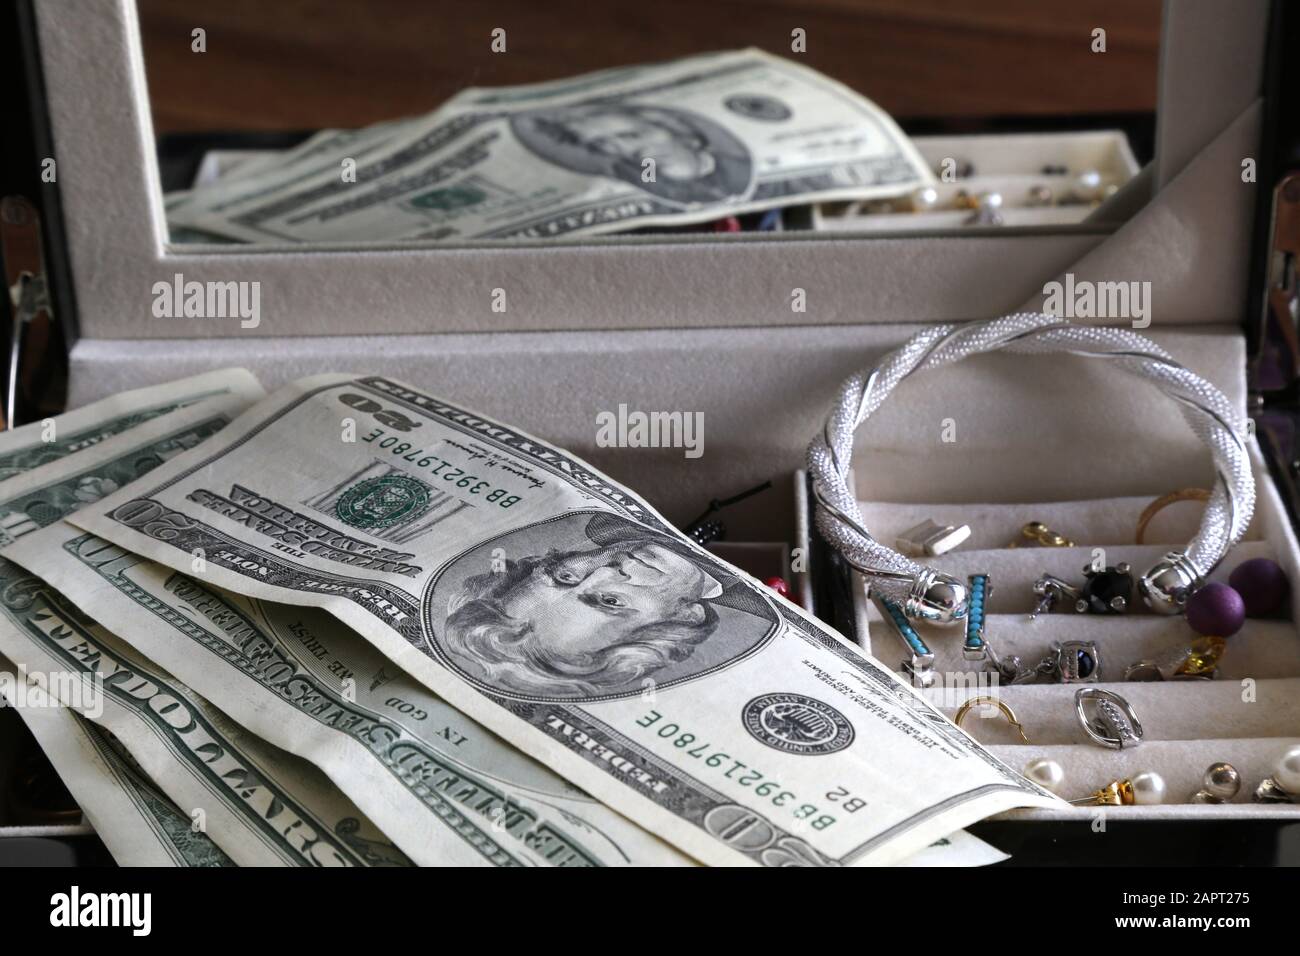 Reflection of box with money and jewelry equally valuable objects Stock Photo